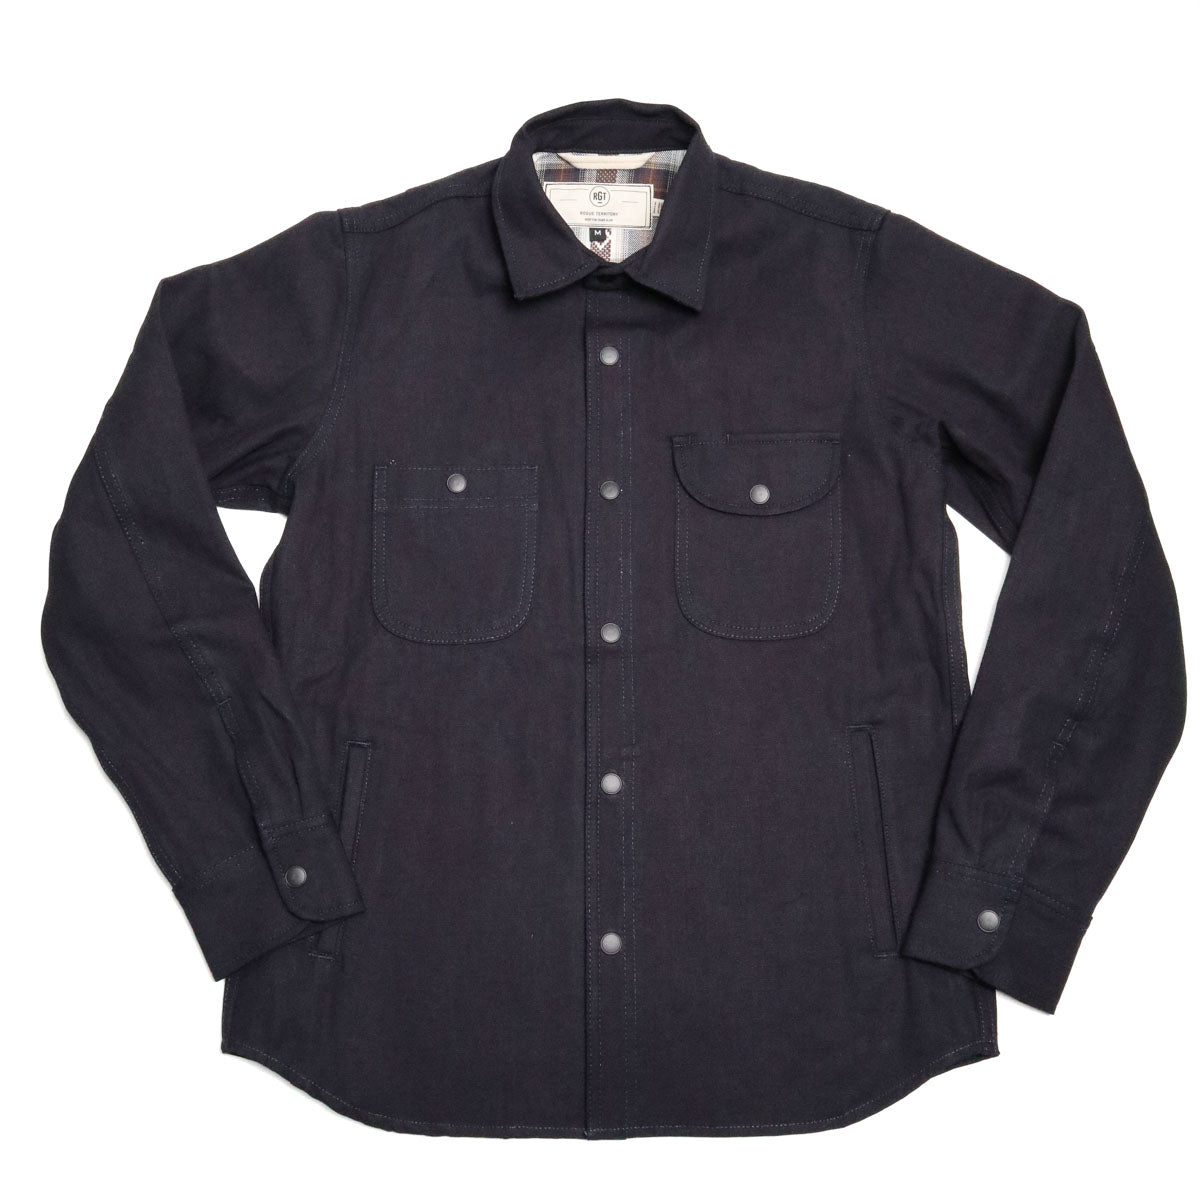 Rogue Territory - Service Shirt - Copper Flannel